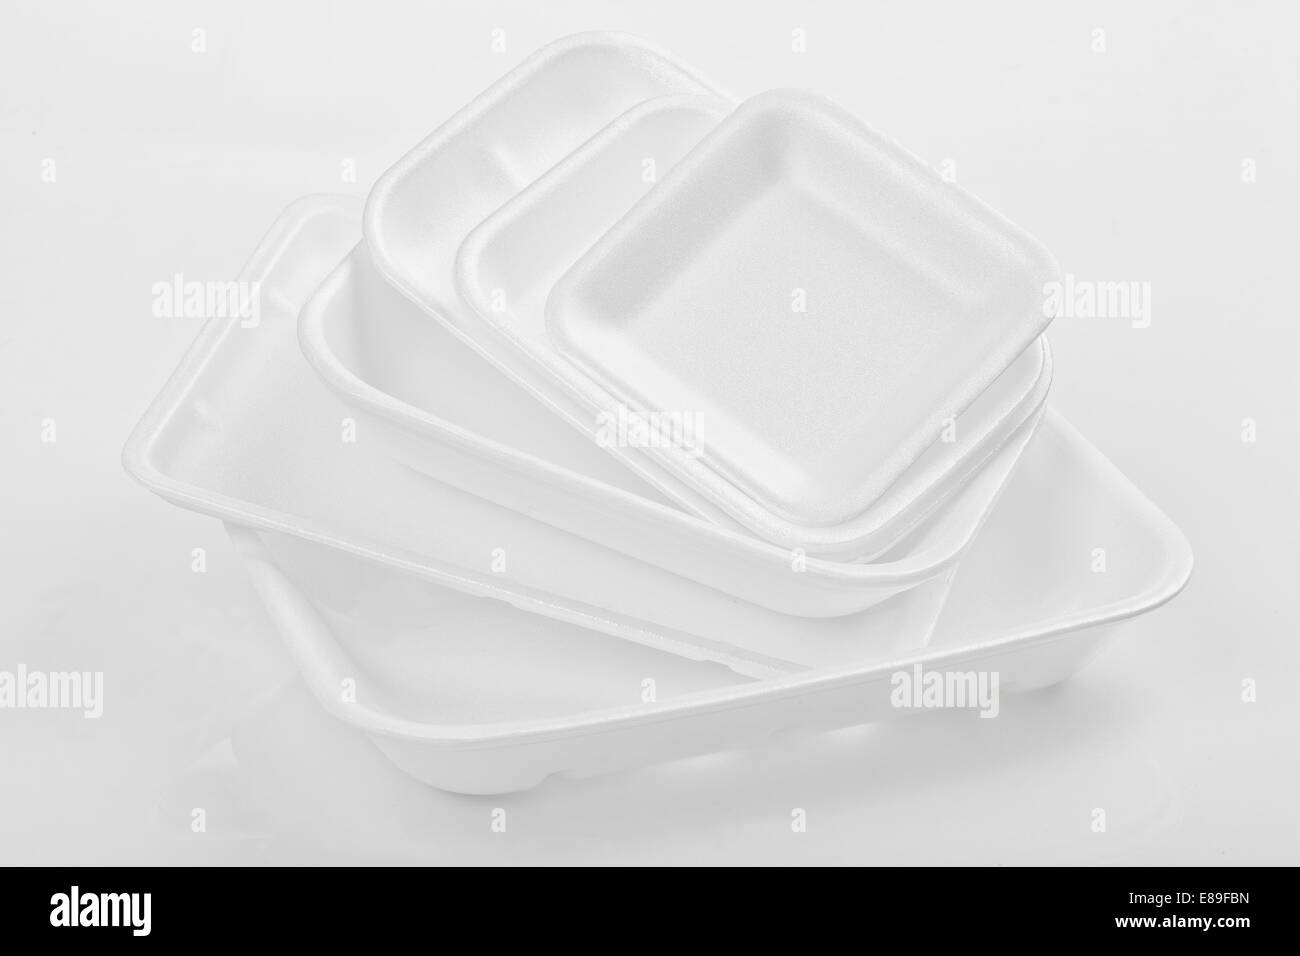 Styrofoam containers of different sizes Stock Photo